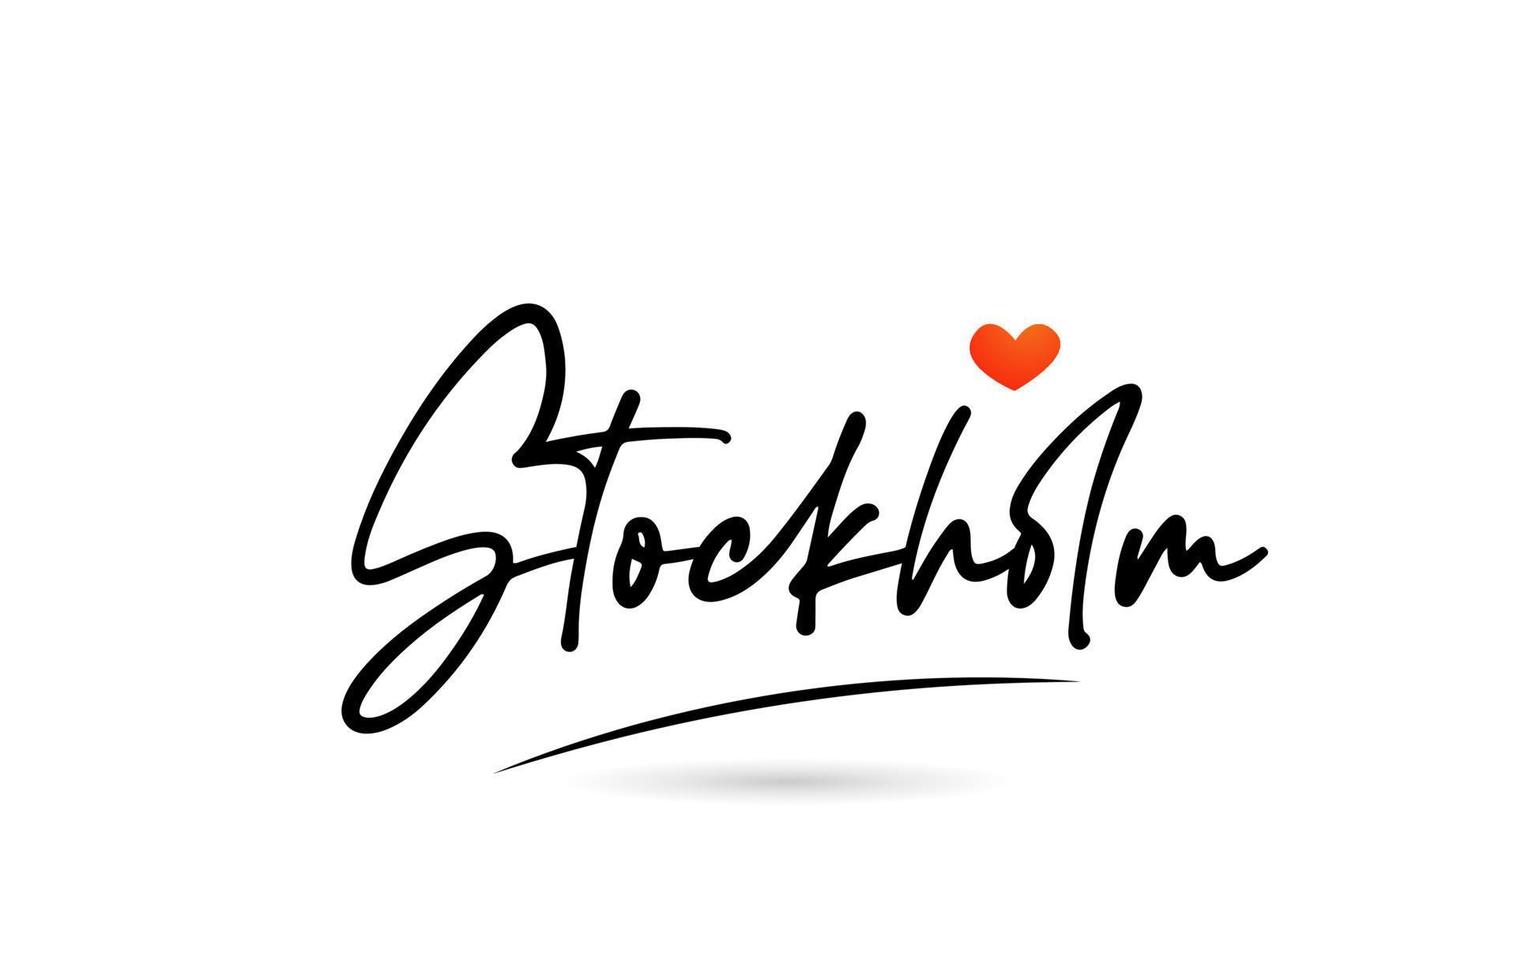 Stockholm city text with red love heart design.  Typography handwritten design icon vector